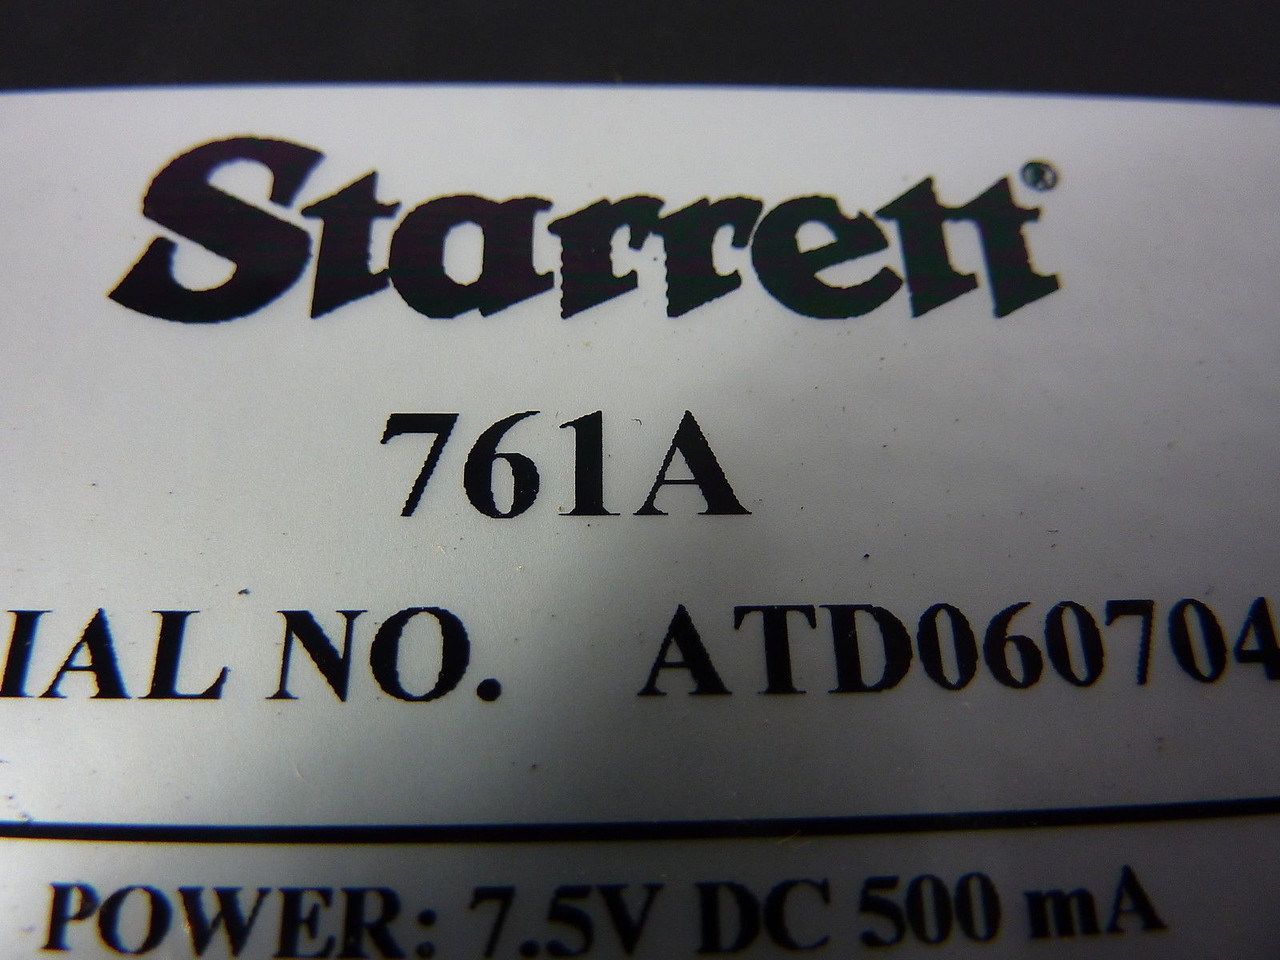 Starrett 761A Data Collector System ATD06070412 500mA 7.5VDC USED